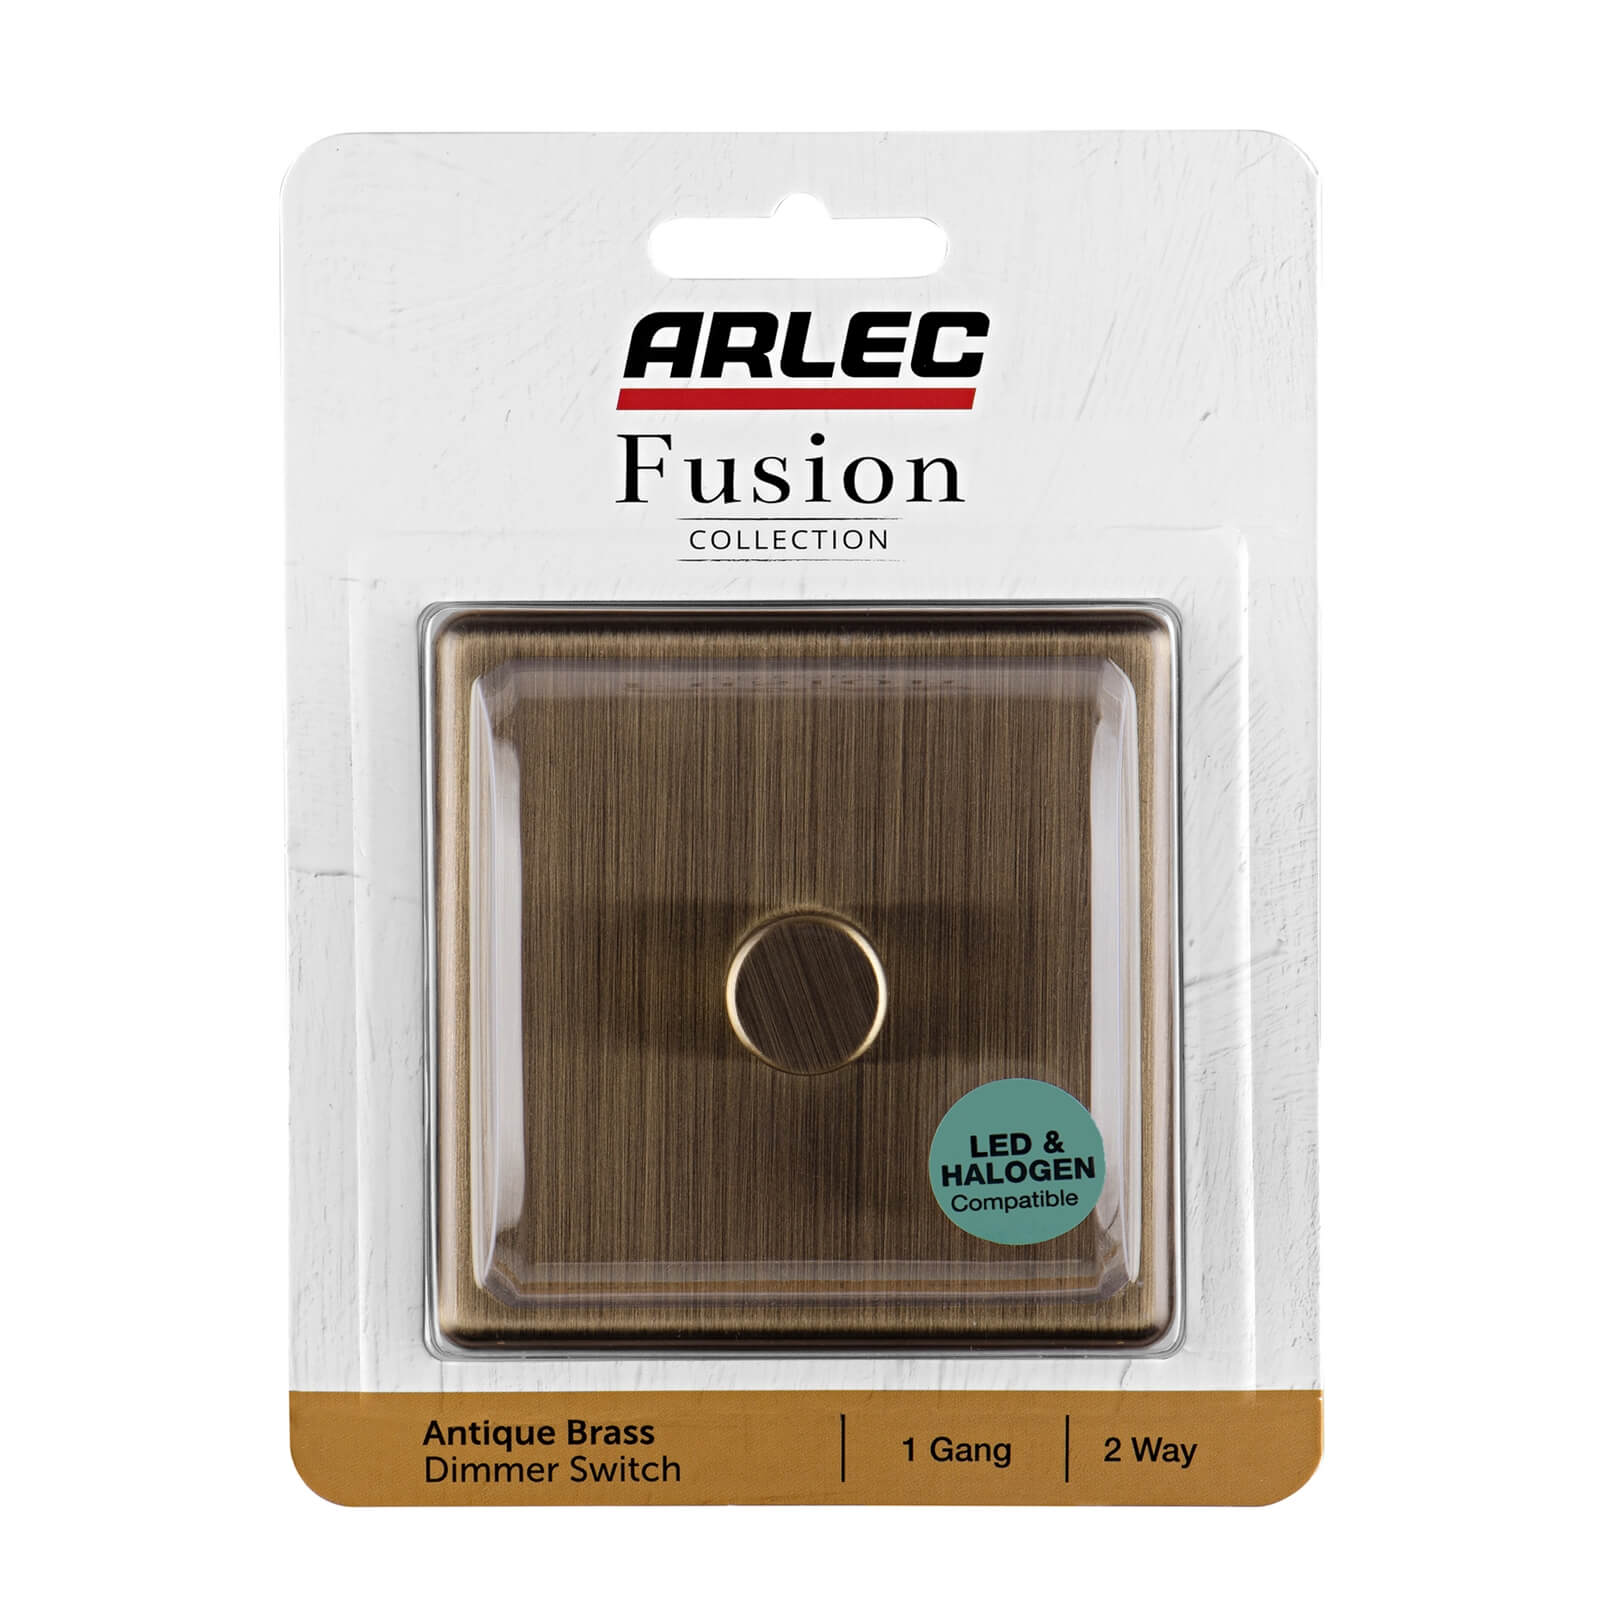 Arlec Fusion 1 Gang 2 Way Antique Brass Dimmer switch